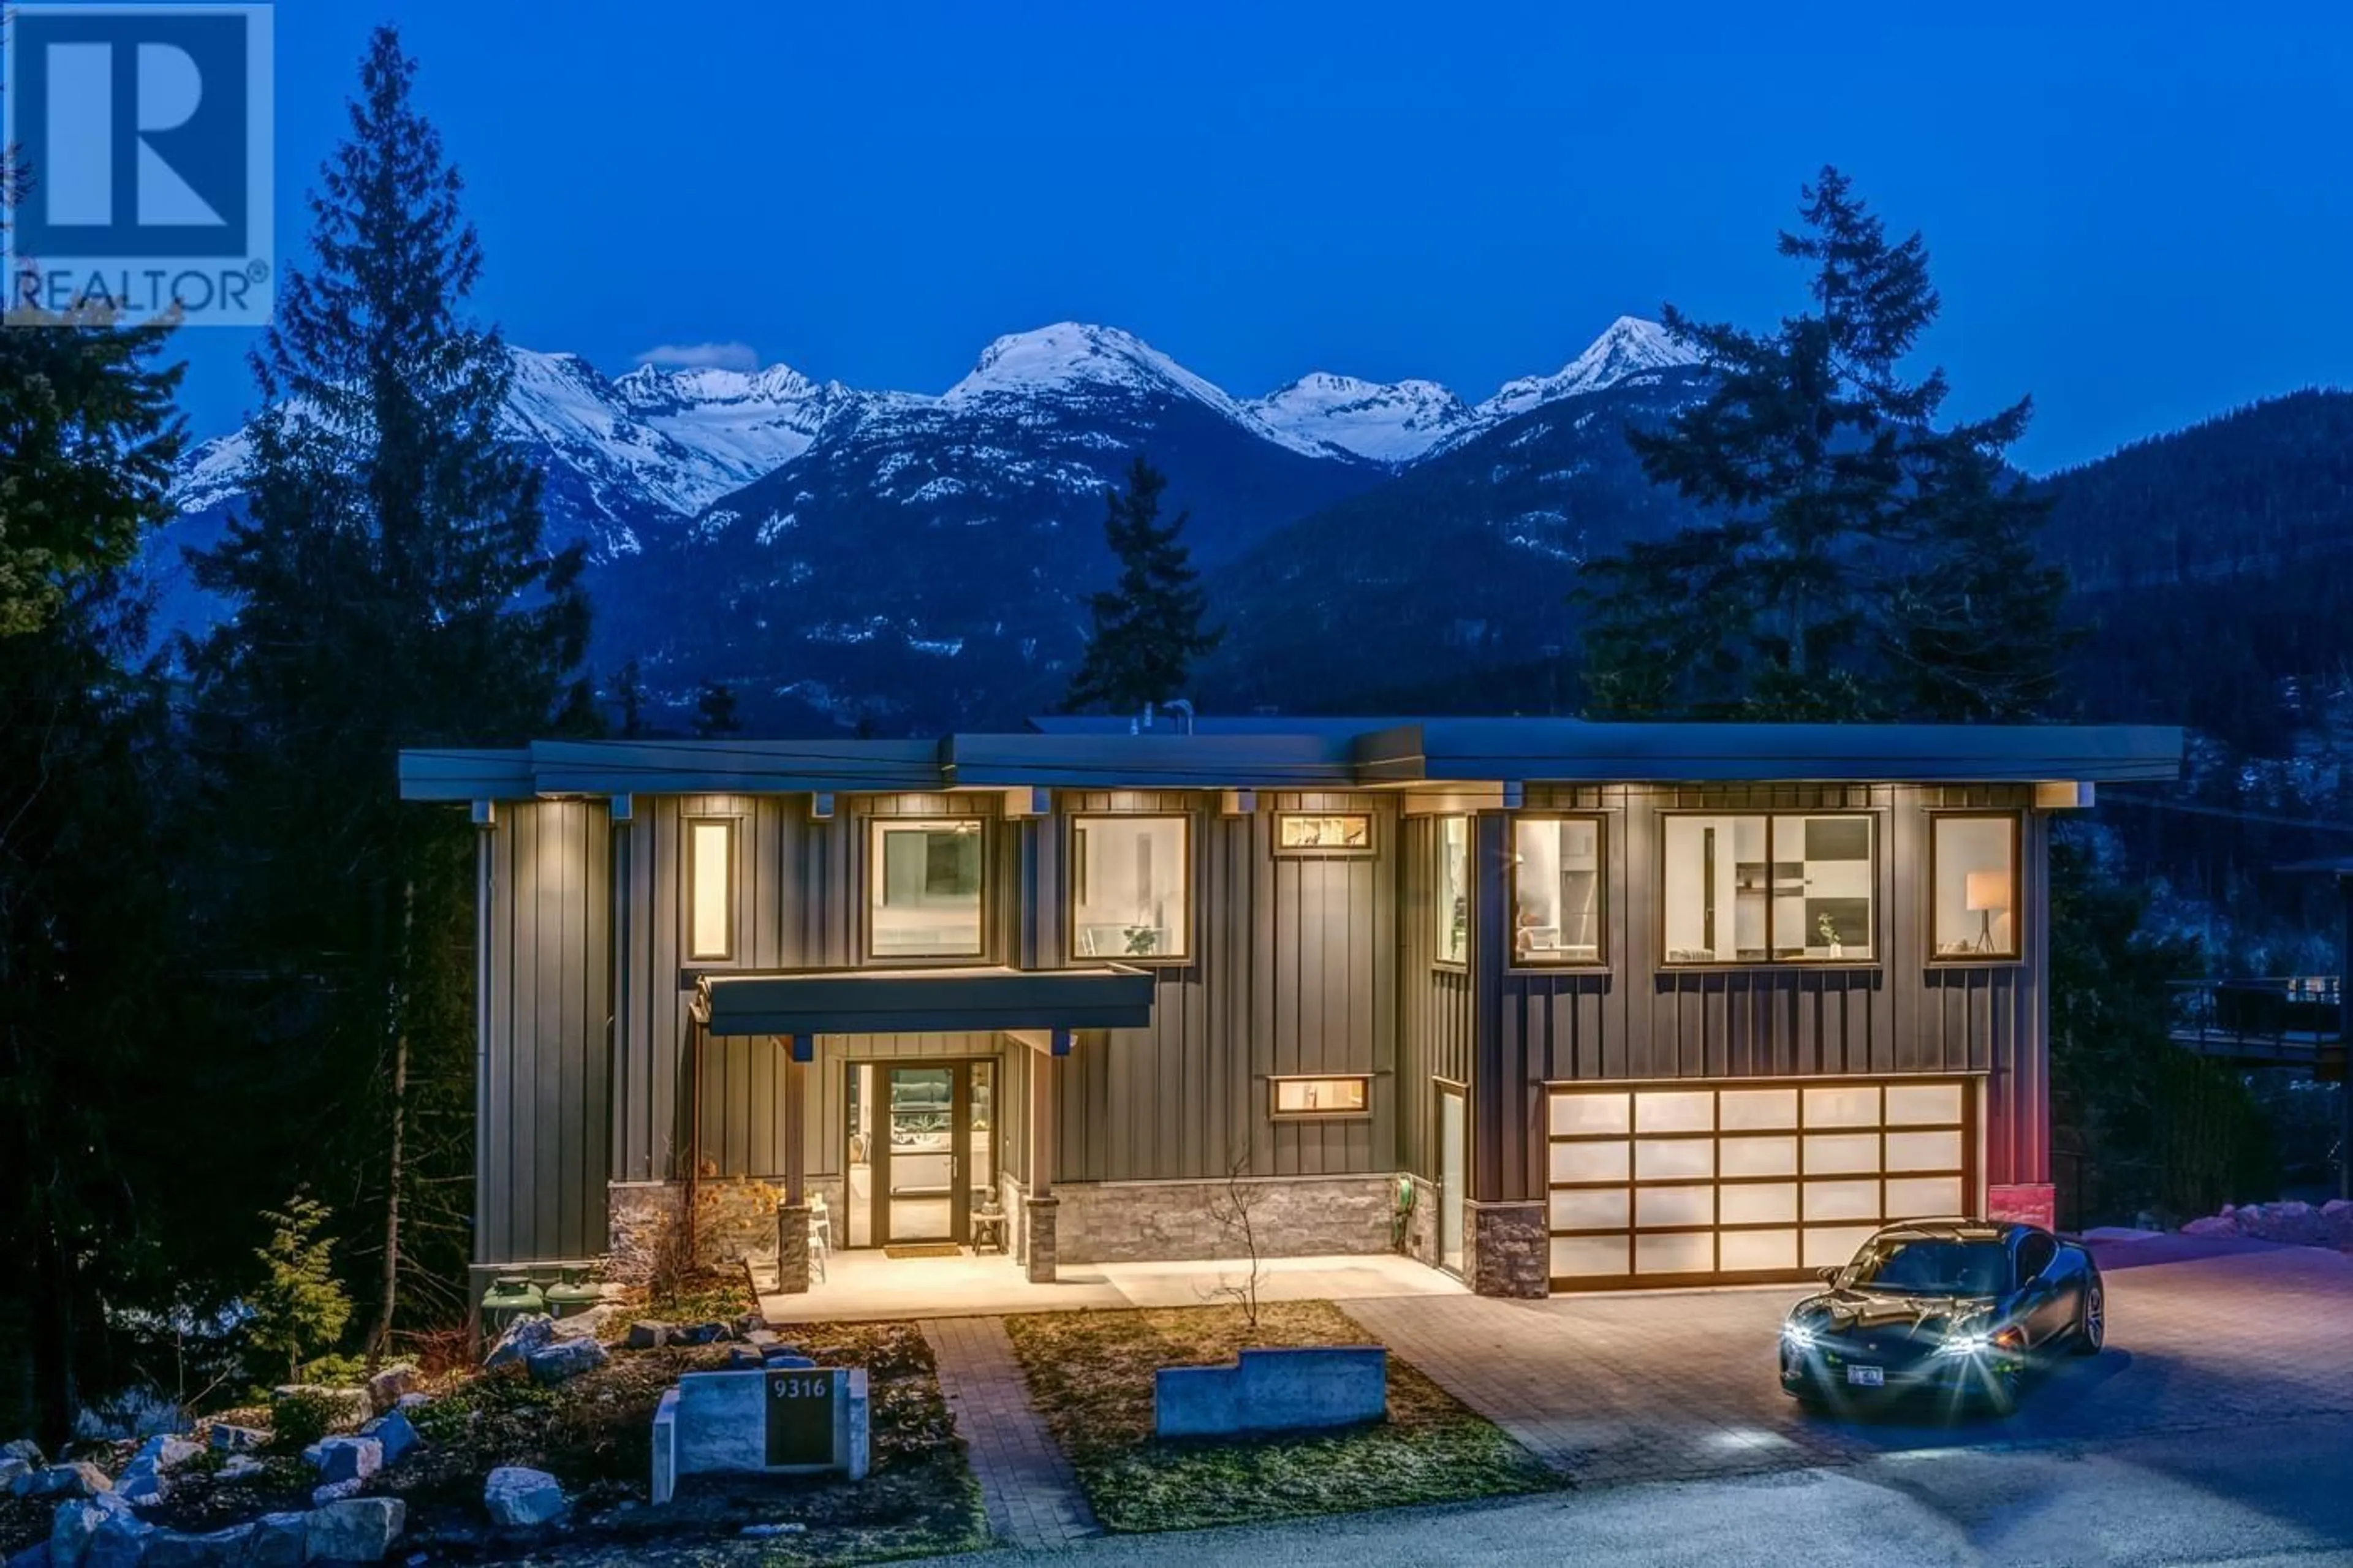 Frontside or backside of a home for 9316 AUTUMN PLACE, Whistler British Columbia V8E0G5